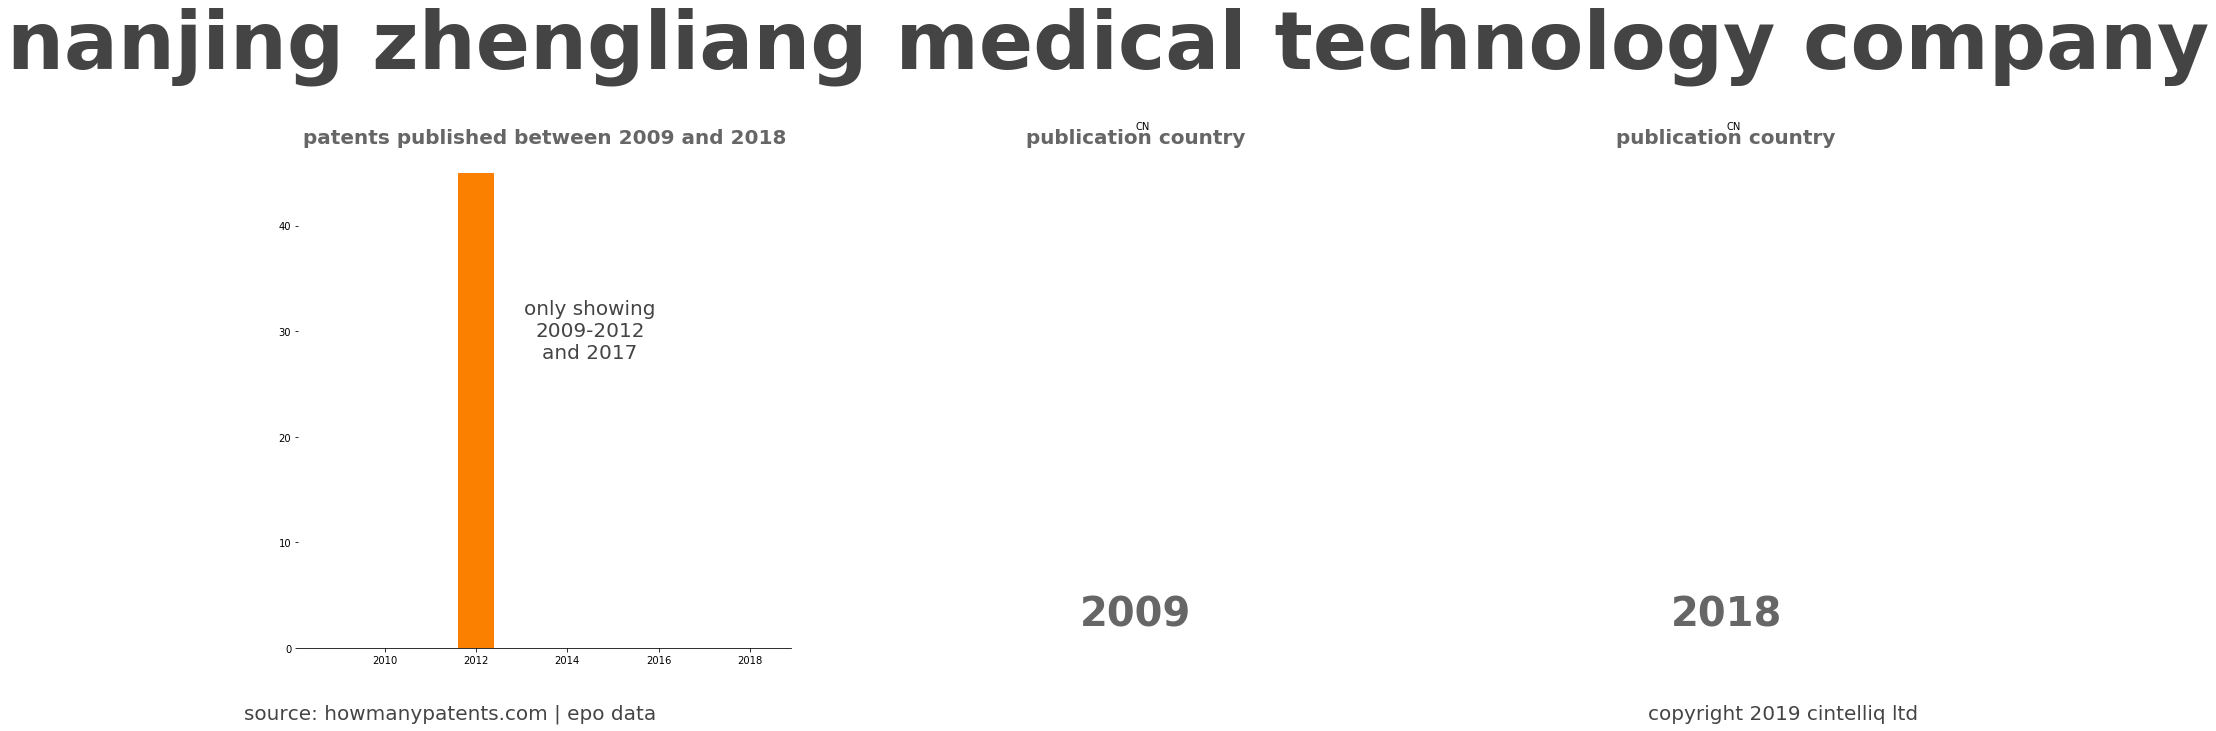 summary of patents for Nanjing Zhengliang Medical Technology Company